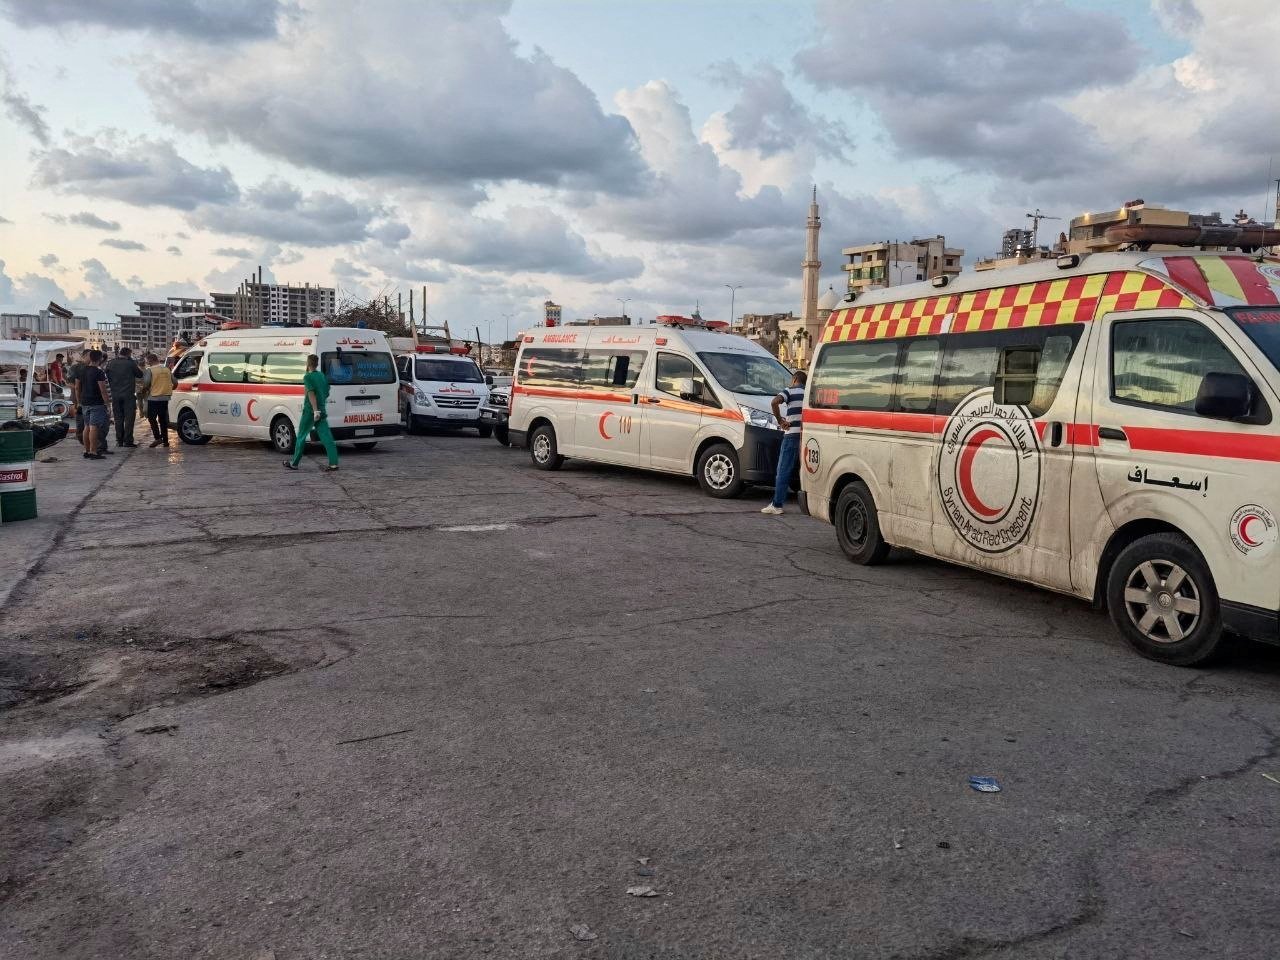 Ambulances are seen during the rescue process of migrants in the port of Tartous, Syria, Sept. 22, 2022, in this picture obtained from social media. (Saleh Sliman/via REUTERS)